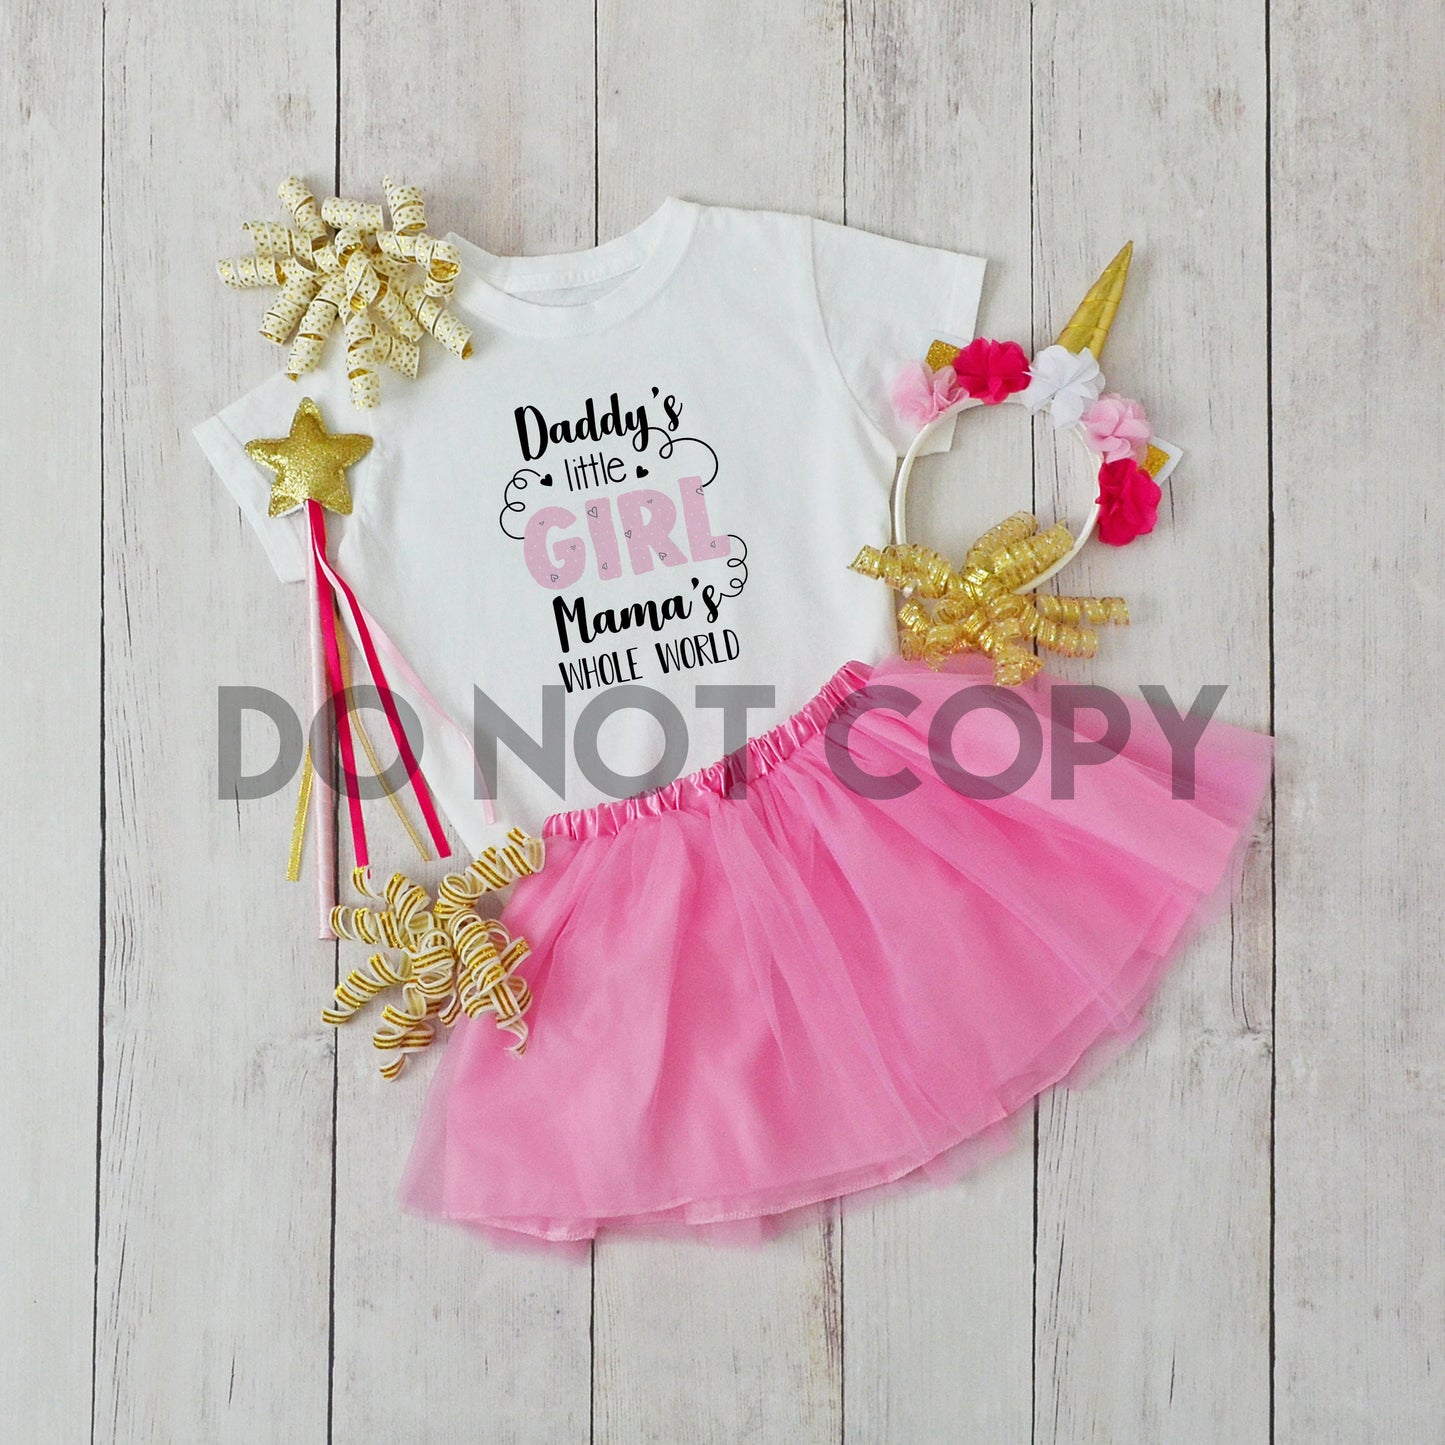 Daddy's Little Girl Mama's Whole World Dream Print or Sublimation Print